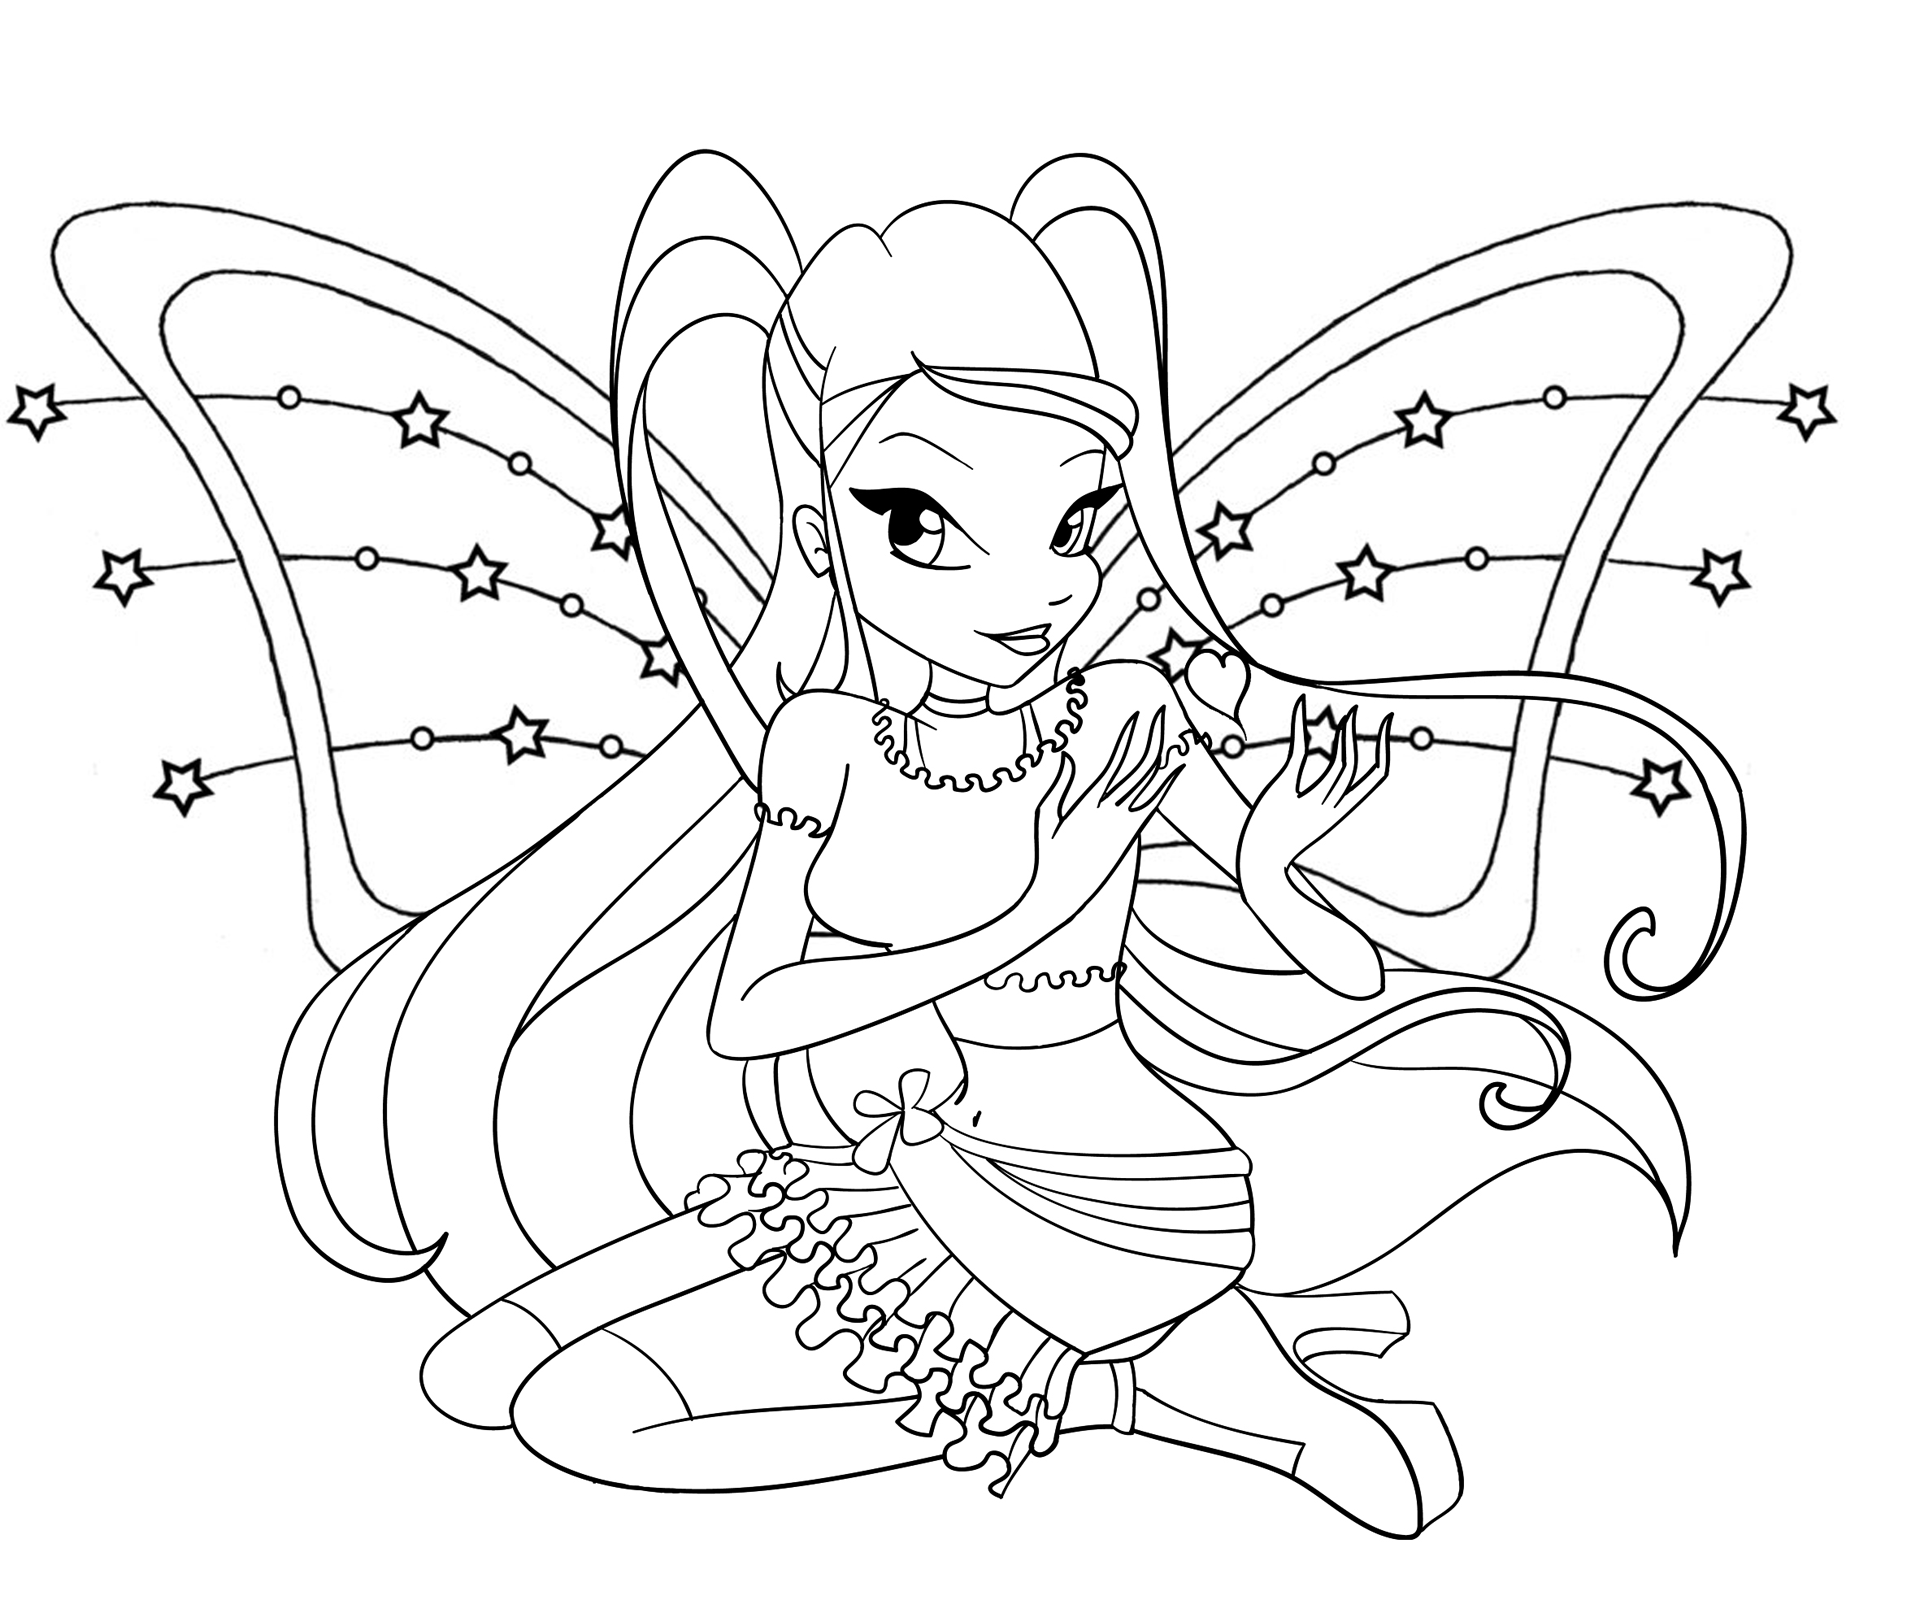 winx club bloom believix coloring pages believix tecna coloring page free printable coloring pages believix bloom pages club coloring winx 